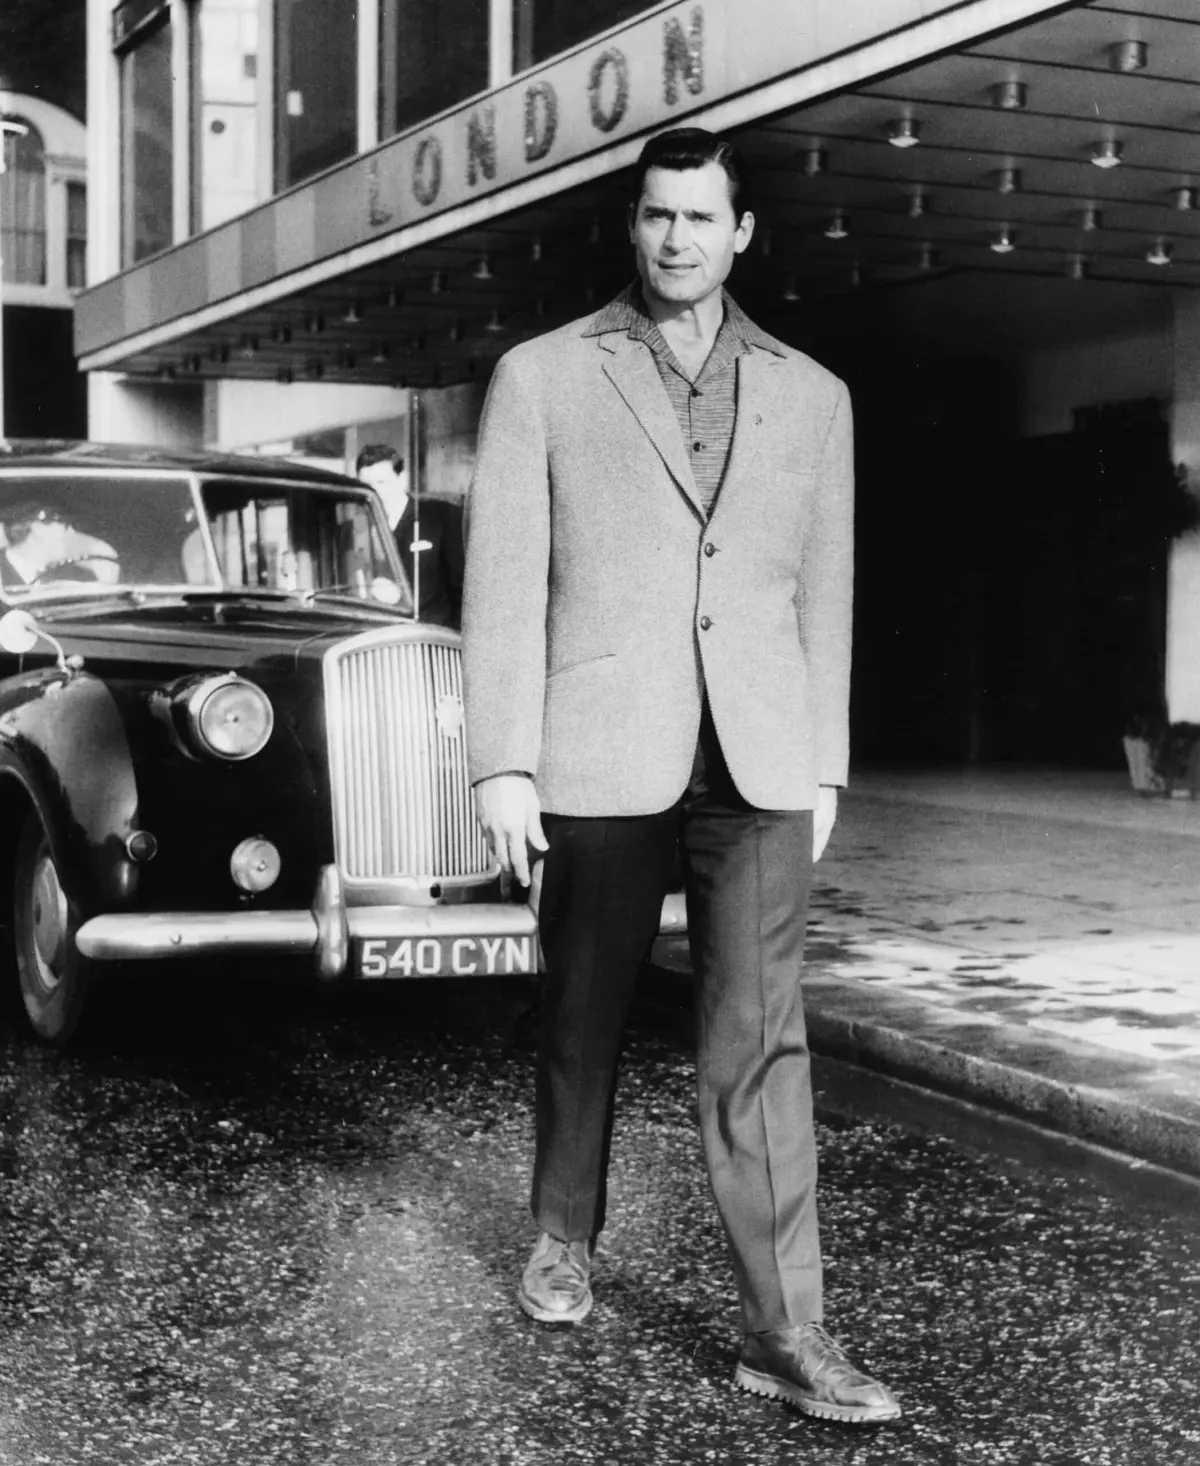 Actor Clint Walker visiting London, on his way to India to film